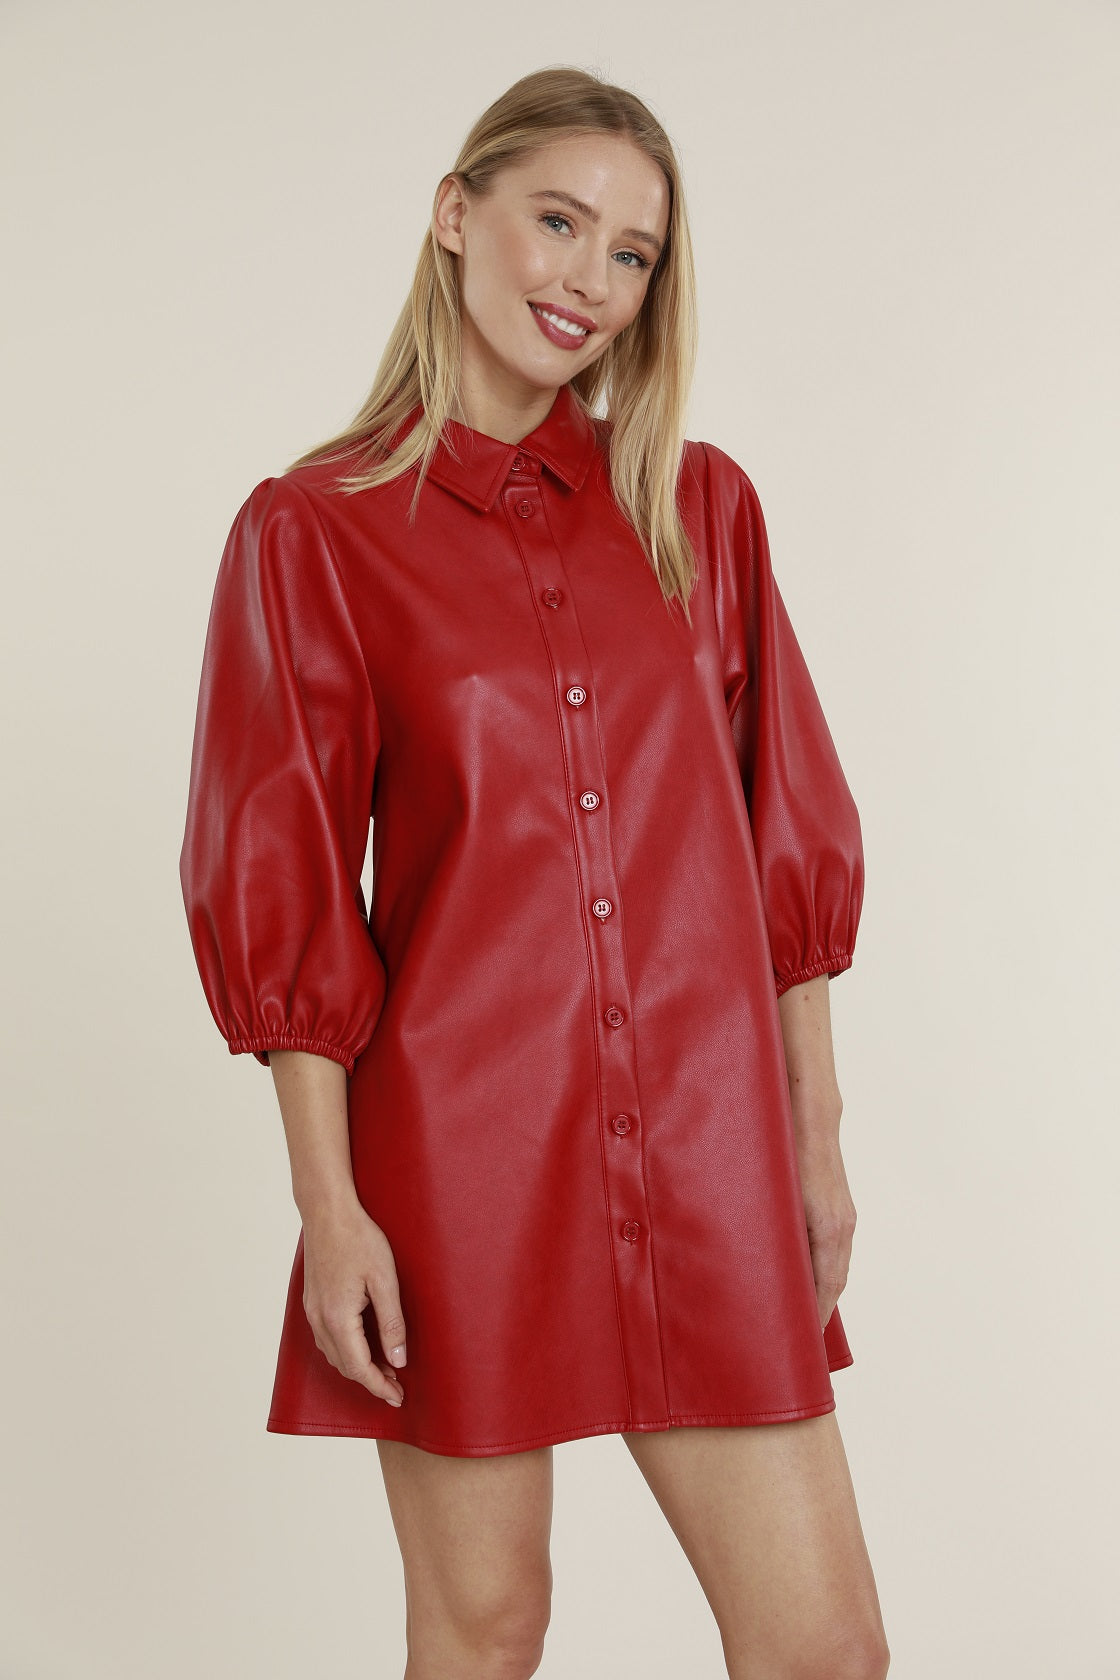 Dolce Cabo Vegan Leather Tunic/Dress- Red